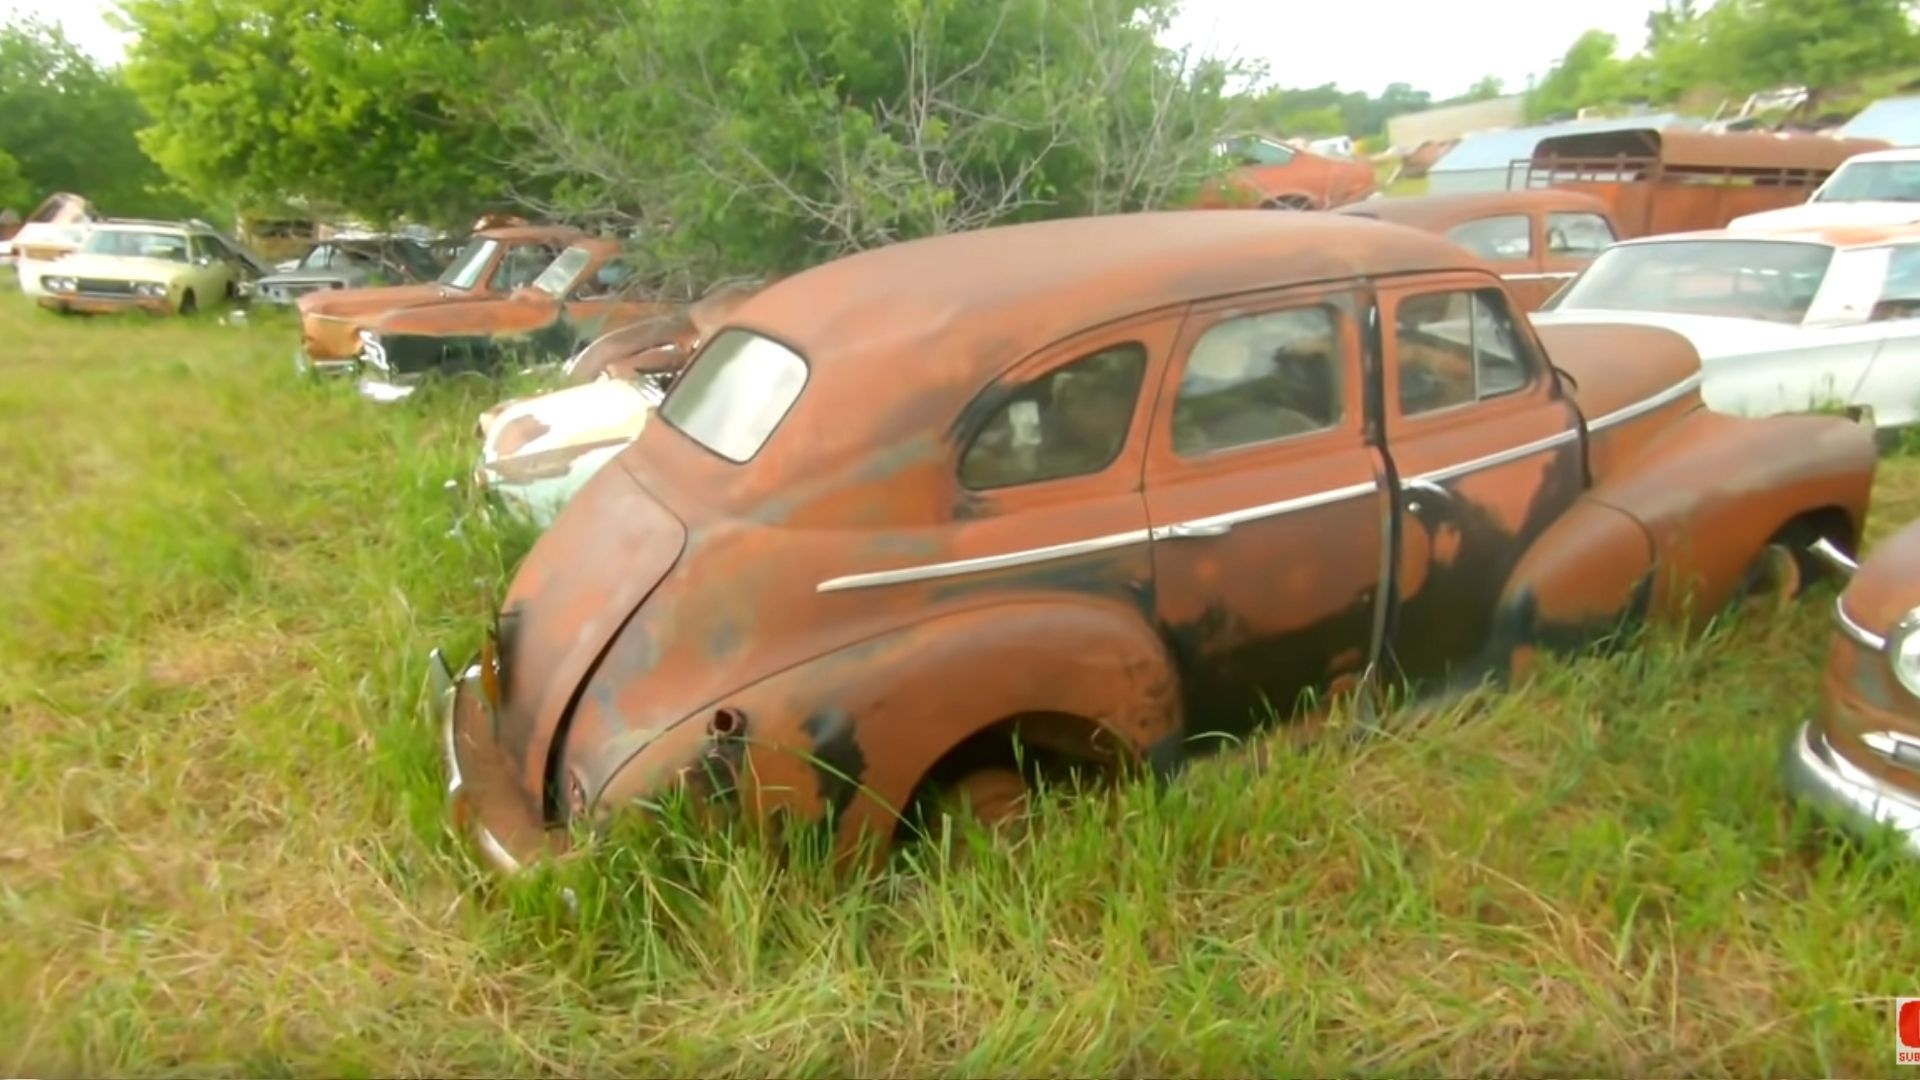 List of Antique foreign car salvage yards 1950s